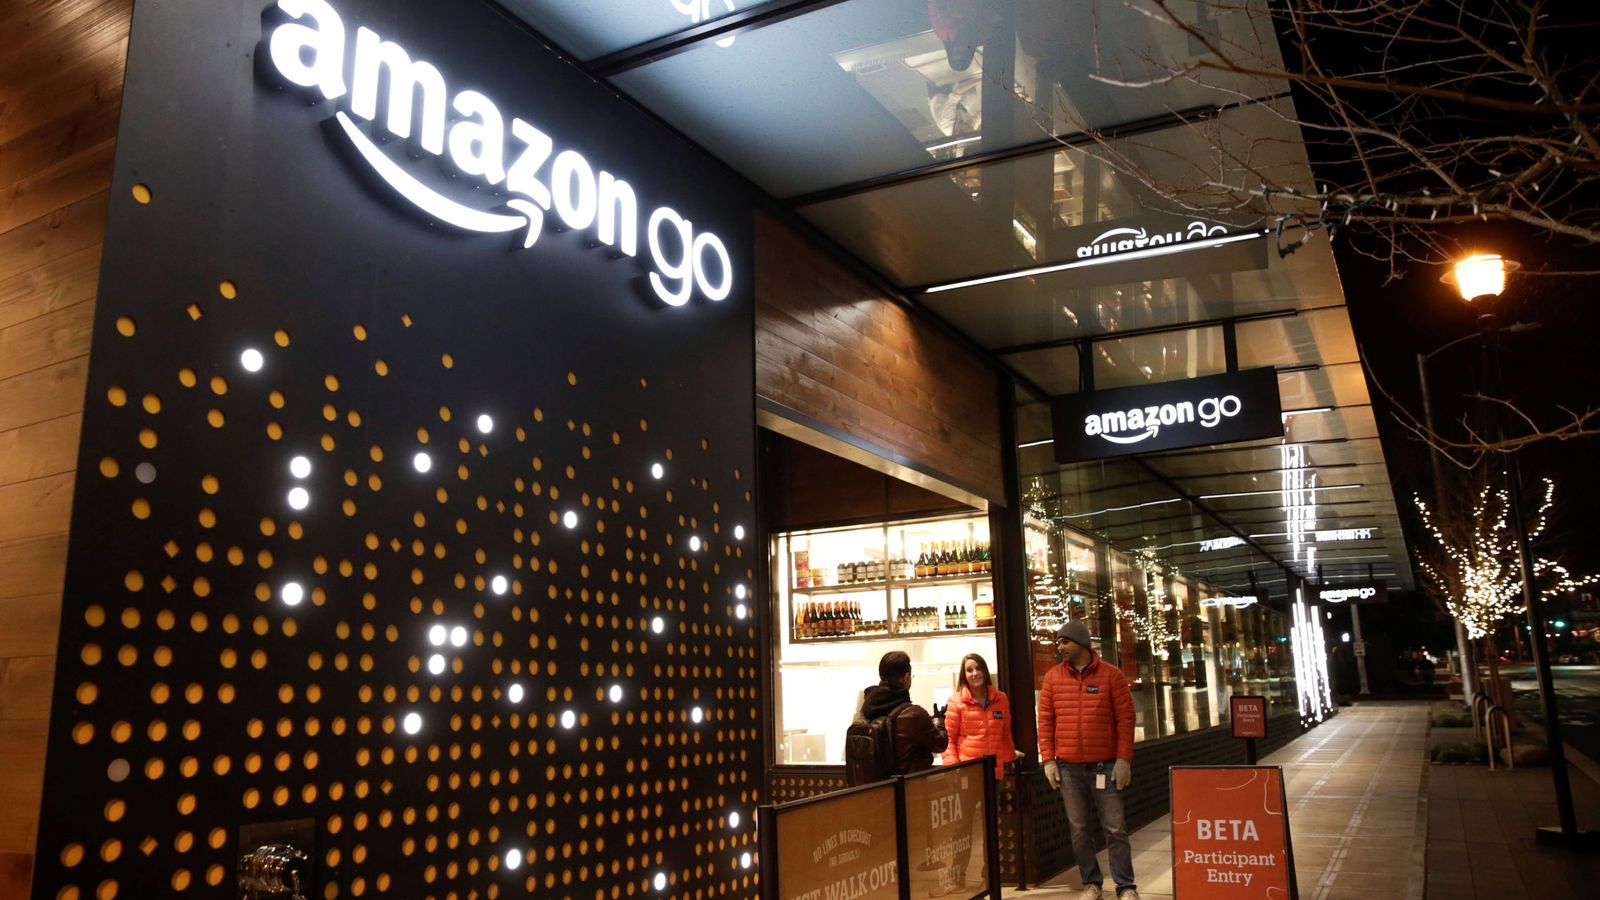 Foto: Amazon employees are pictured outside the amazon go brick-and-mortar grocery store without lines or checkout counters, in seattle washington